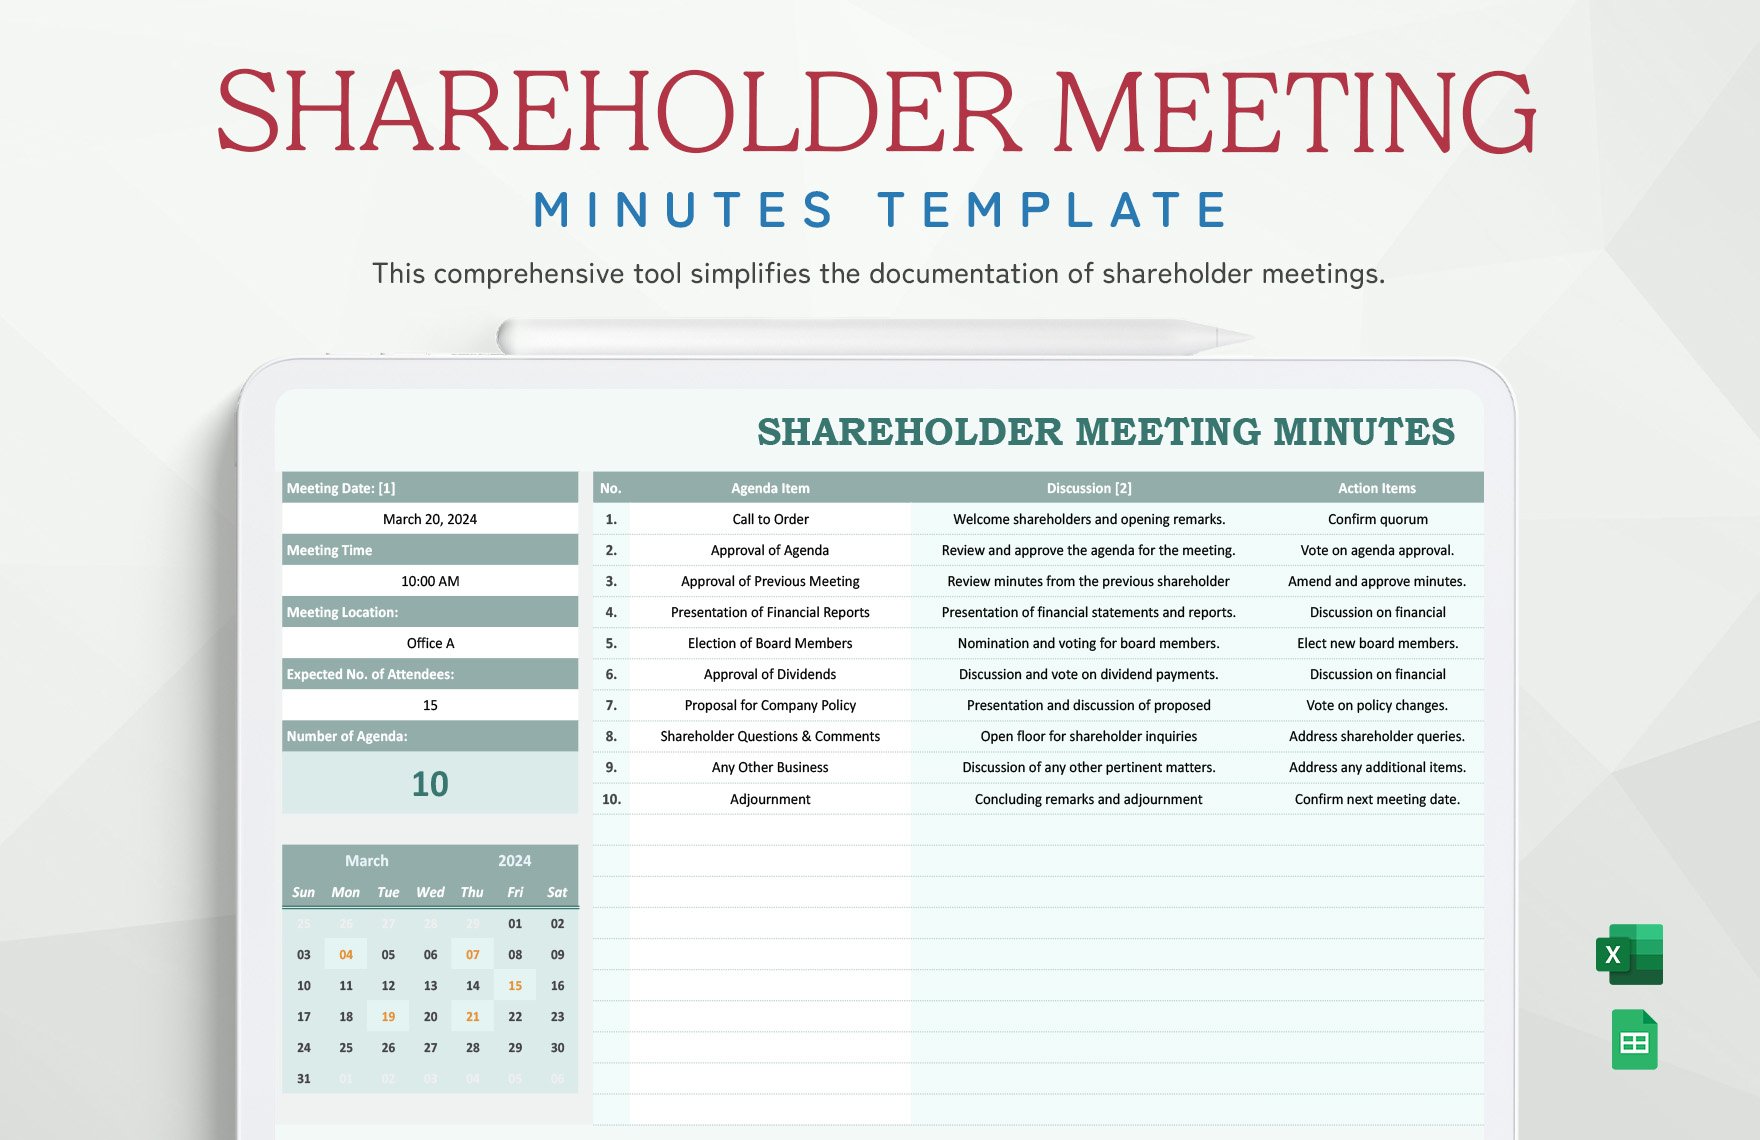 Shareholder Meeting Minutes Template in Excel, Google Sheets